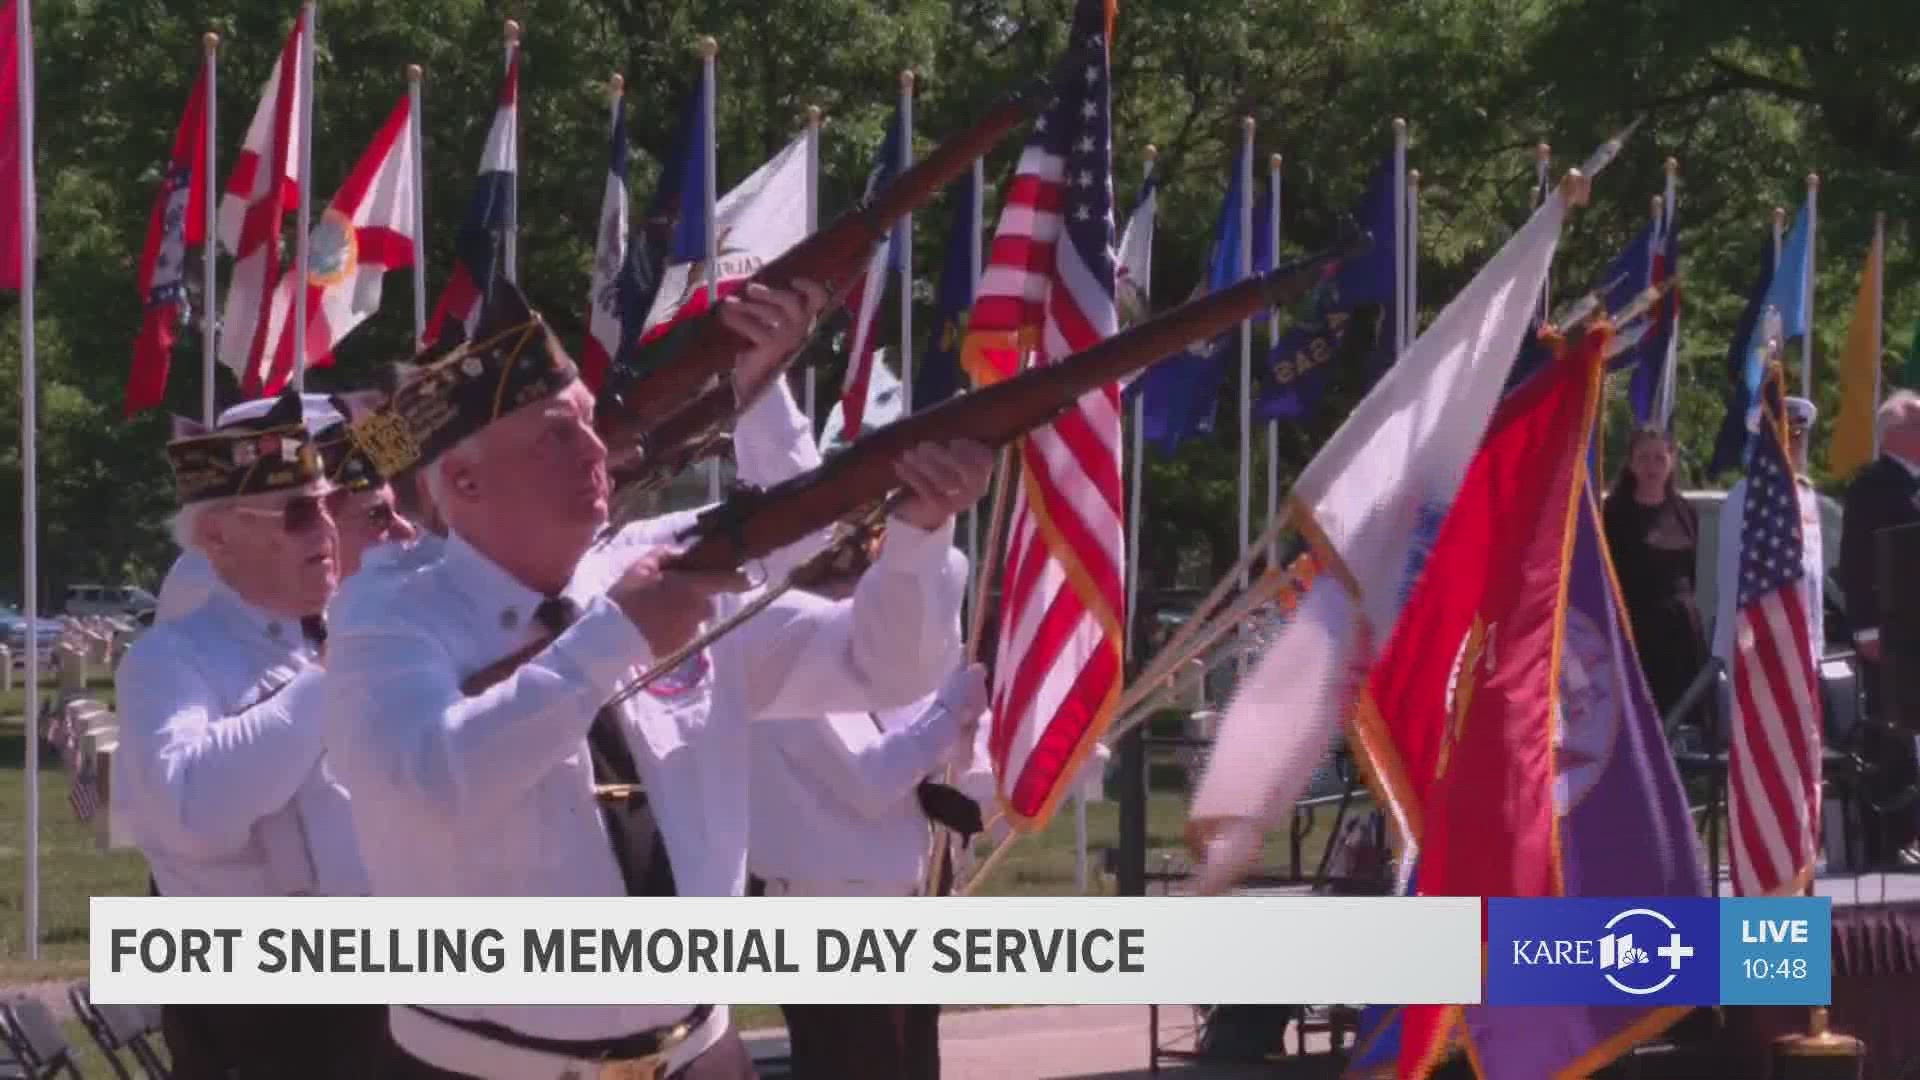 U.S. Senator Amy Klobuchar, Gov. Tim Walz and retired Navy Lt. Commander Mike Peterson were among those at Fort Snelling paying tribute to those who sacrificed.